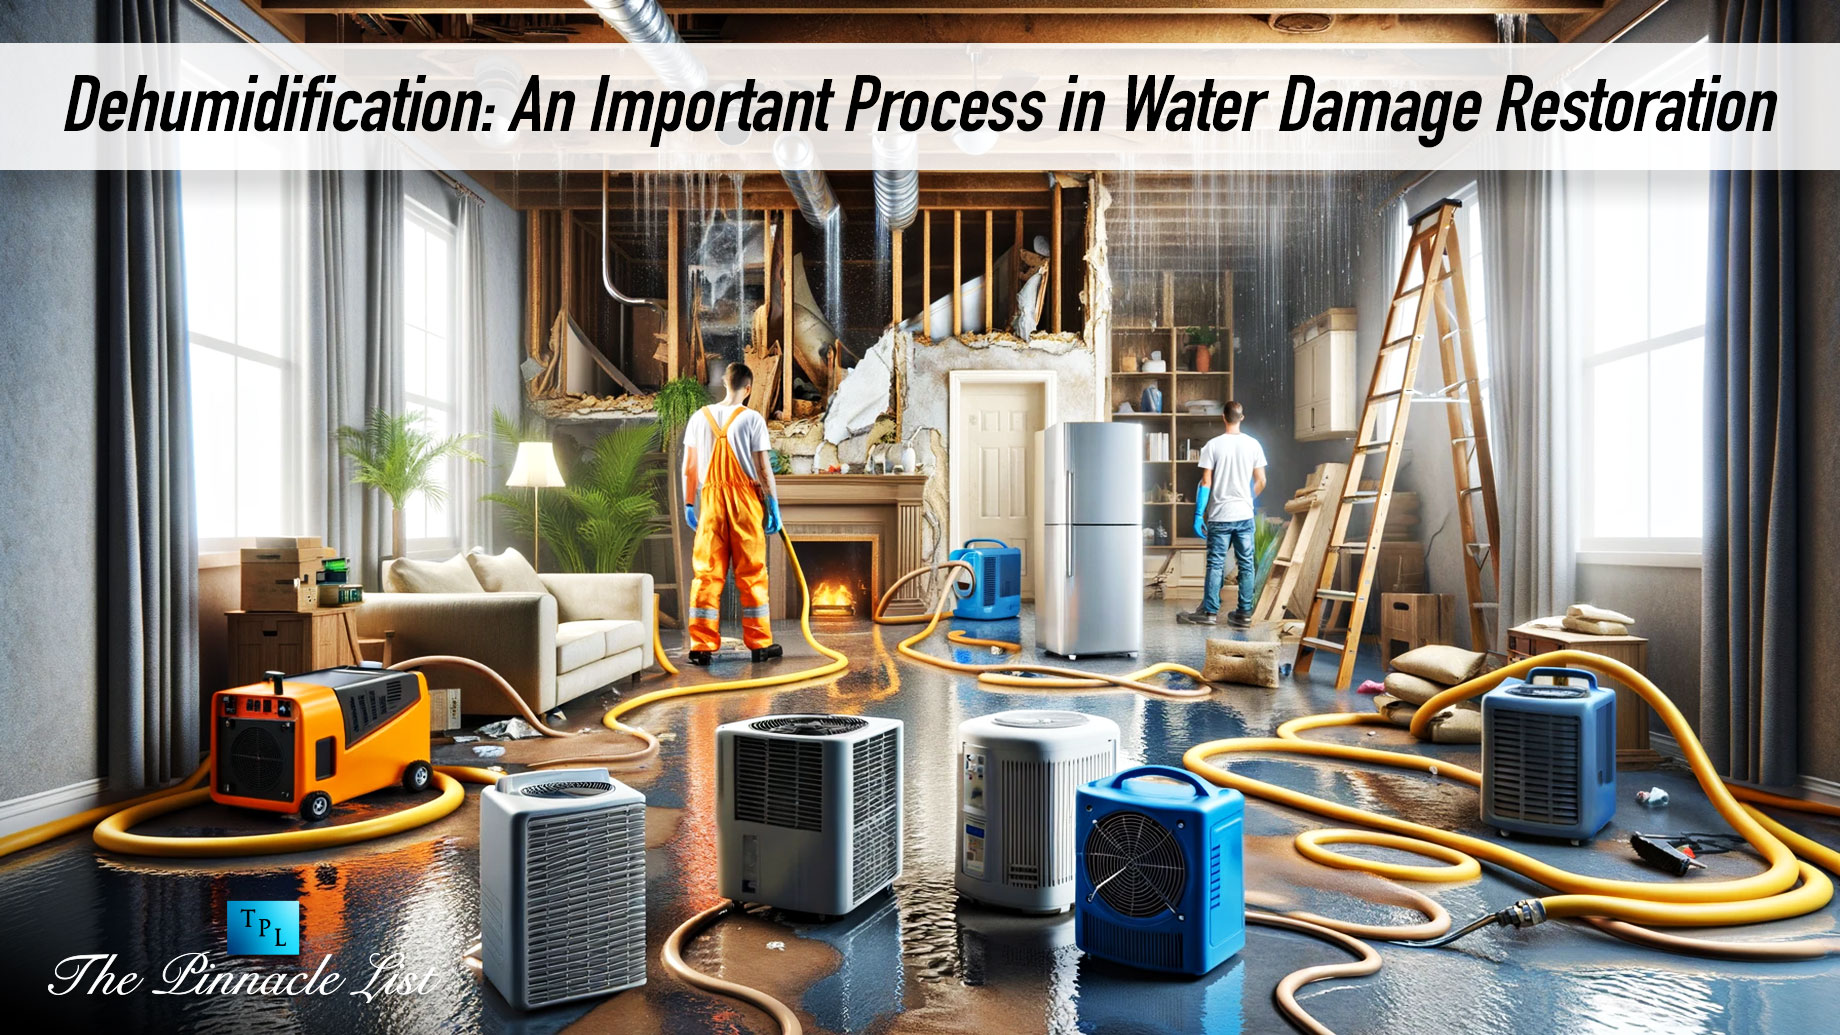 Dehumidification: An Important Process in Water Damage Restoration